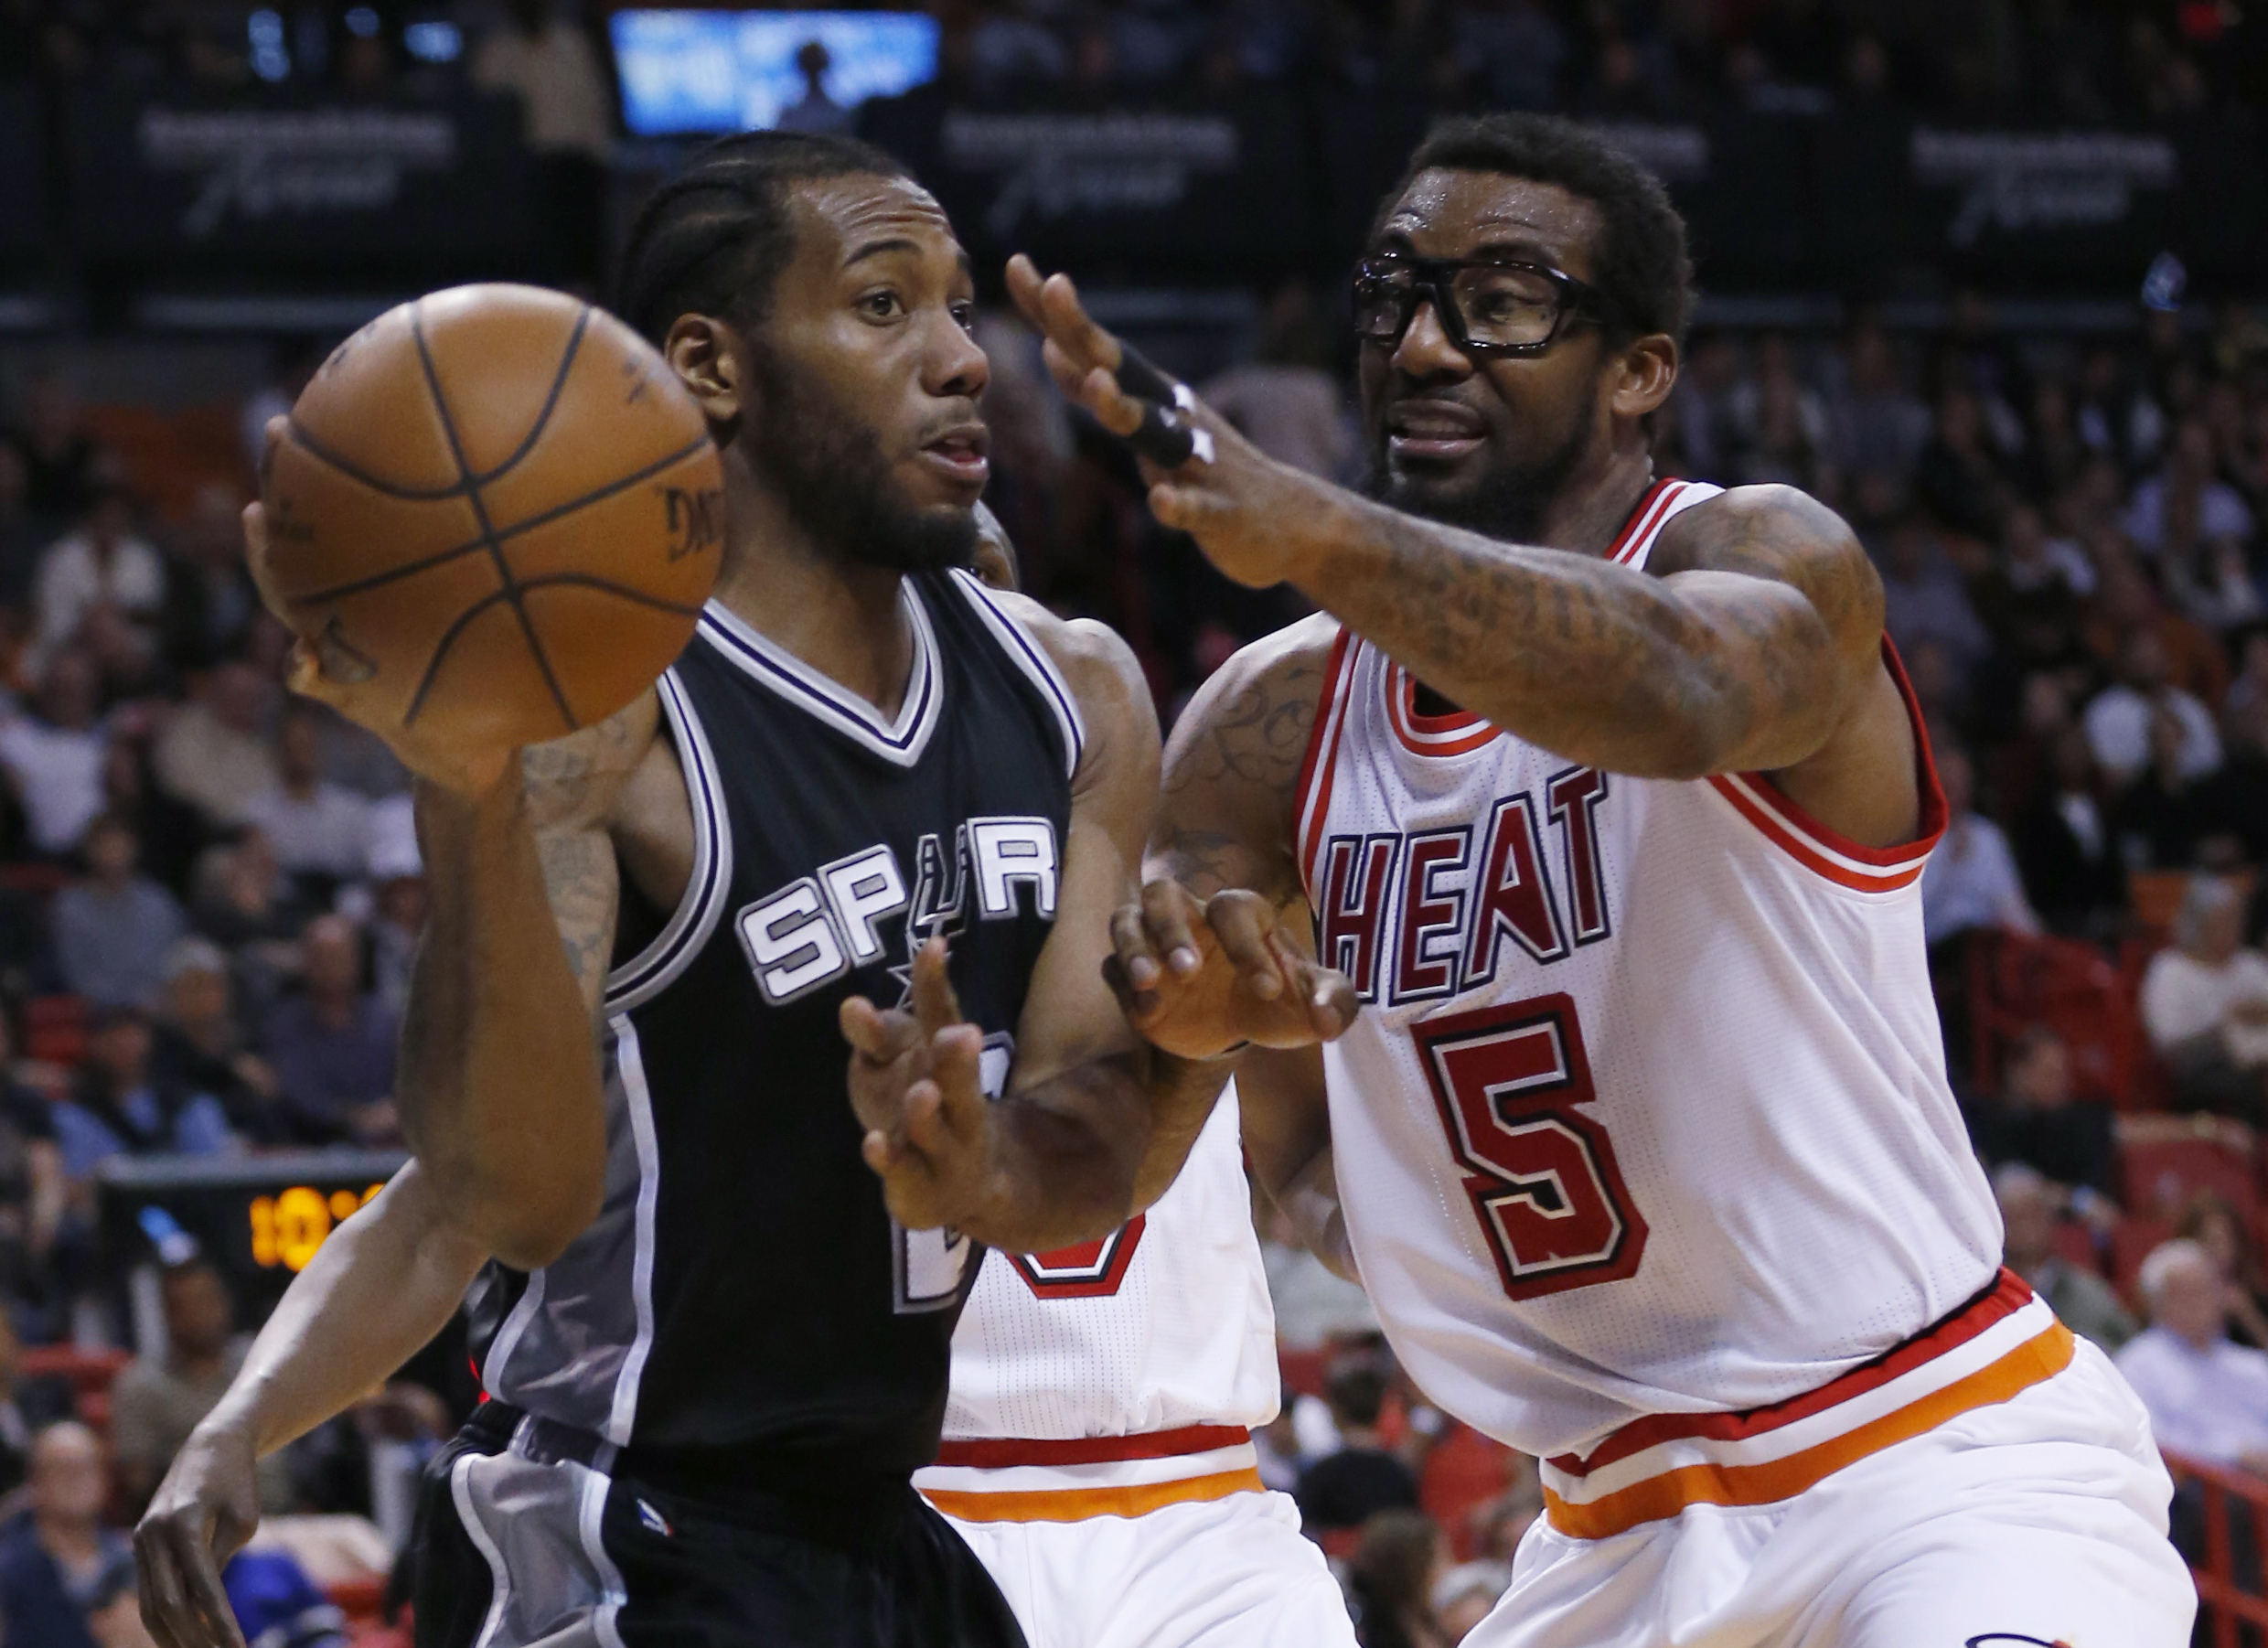 Amar'e Stoudemire elected by fans to start for East at NBA All